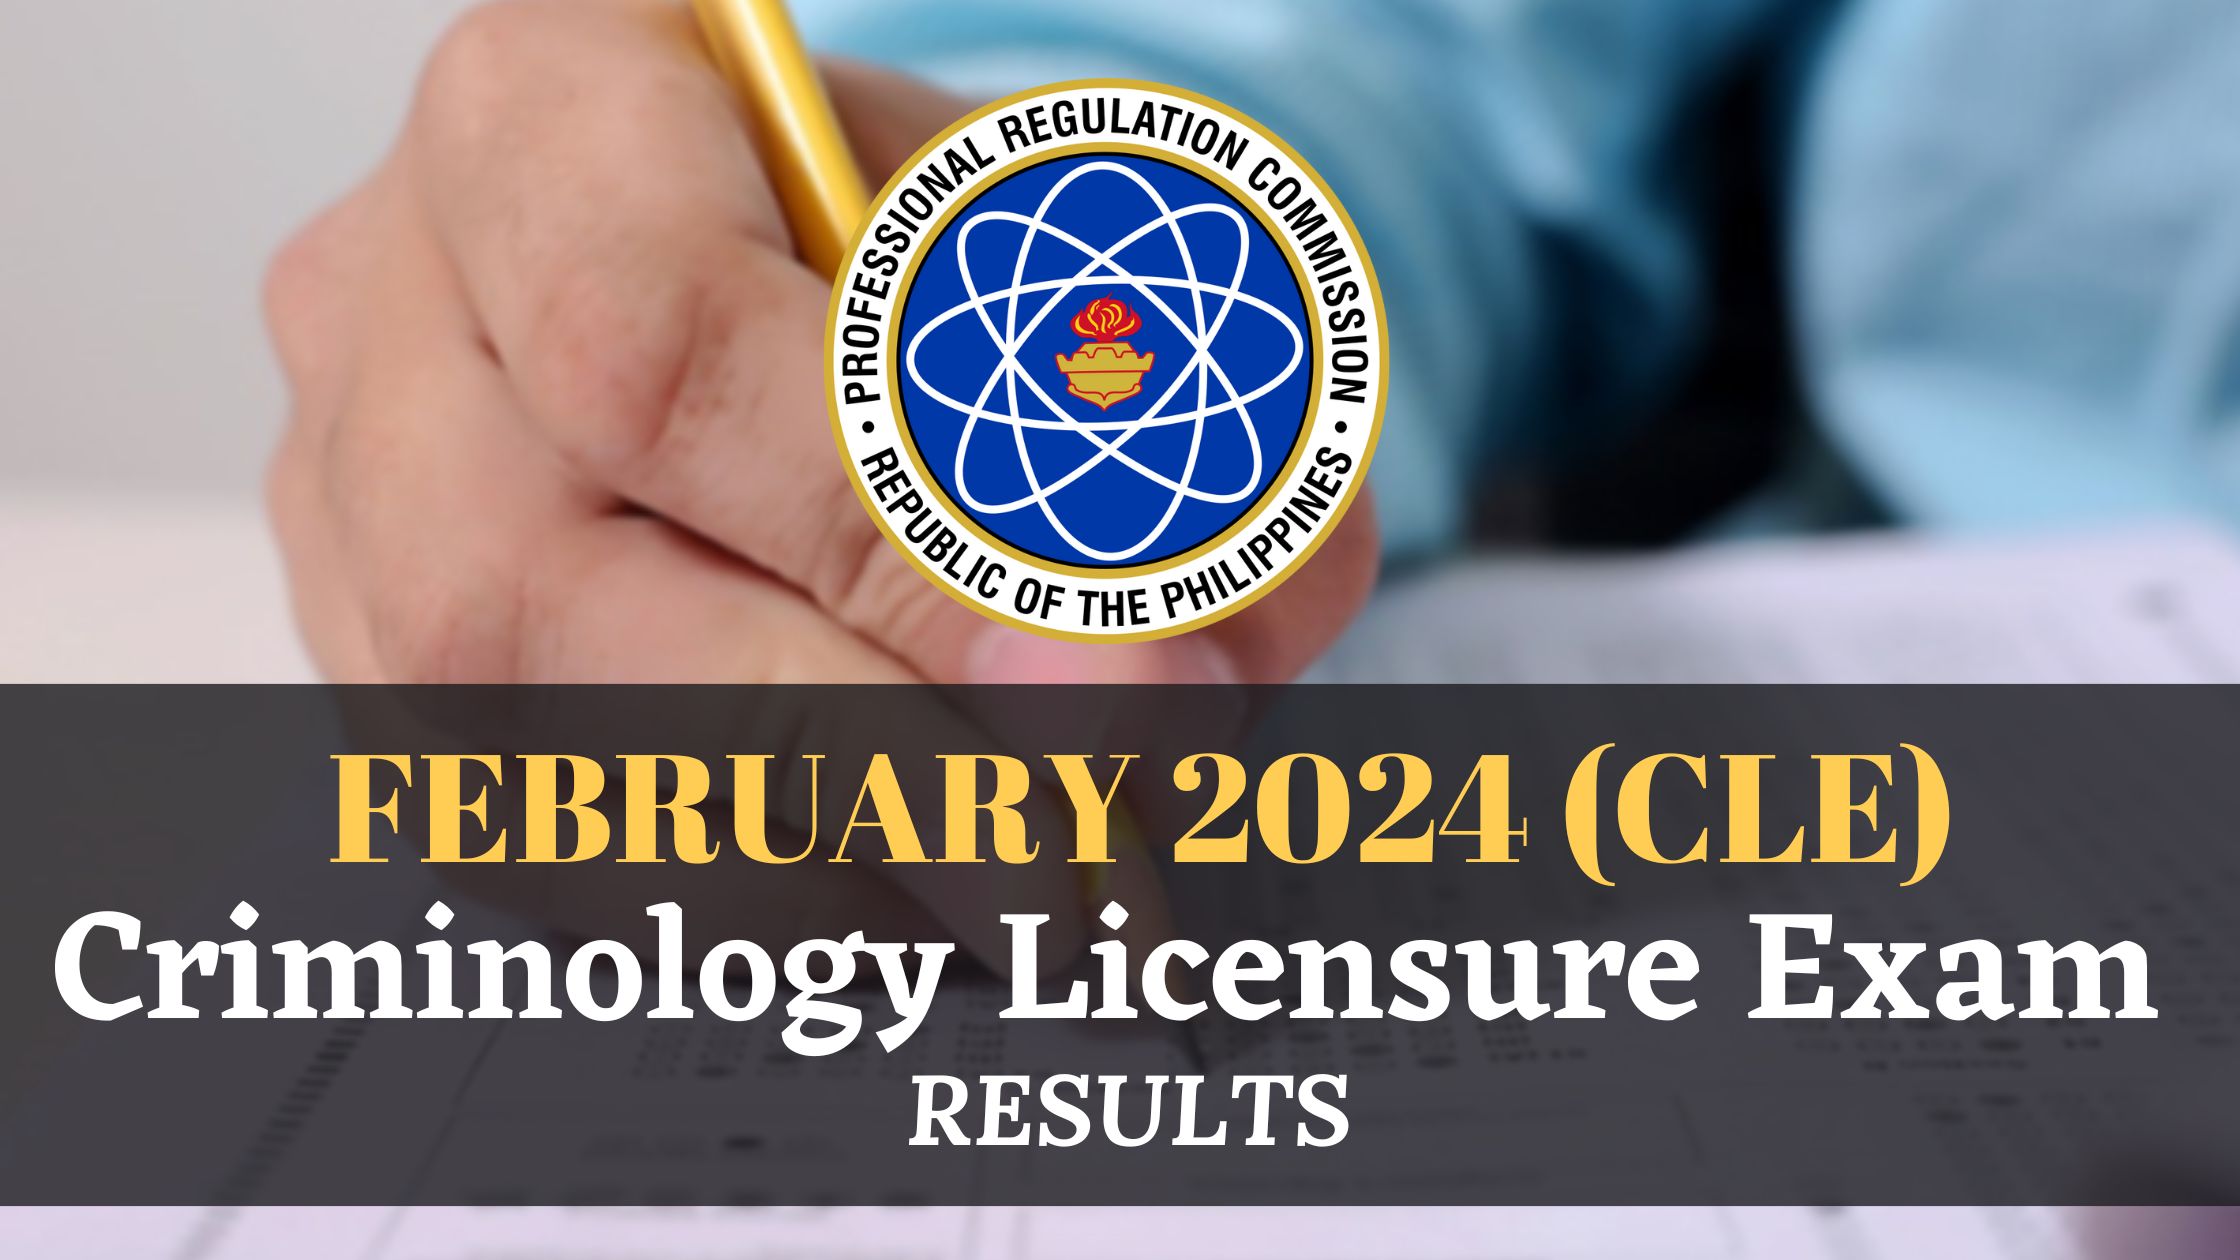 FEBRUARY 2024 CLE RESULTS CRIMINOLOGY LICENSURE EXAM PASSERS